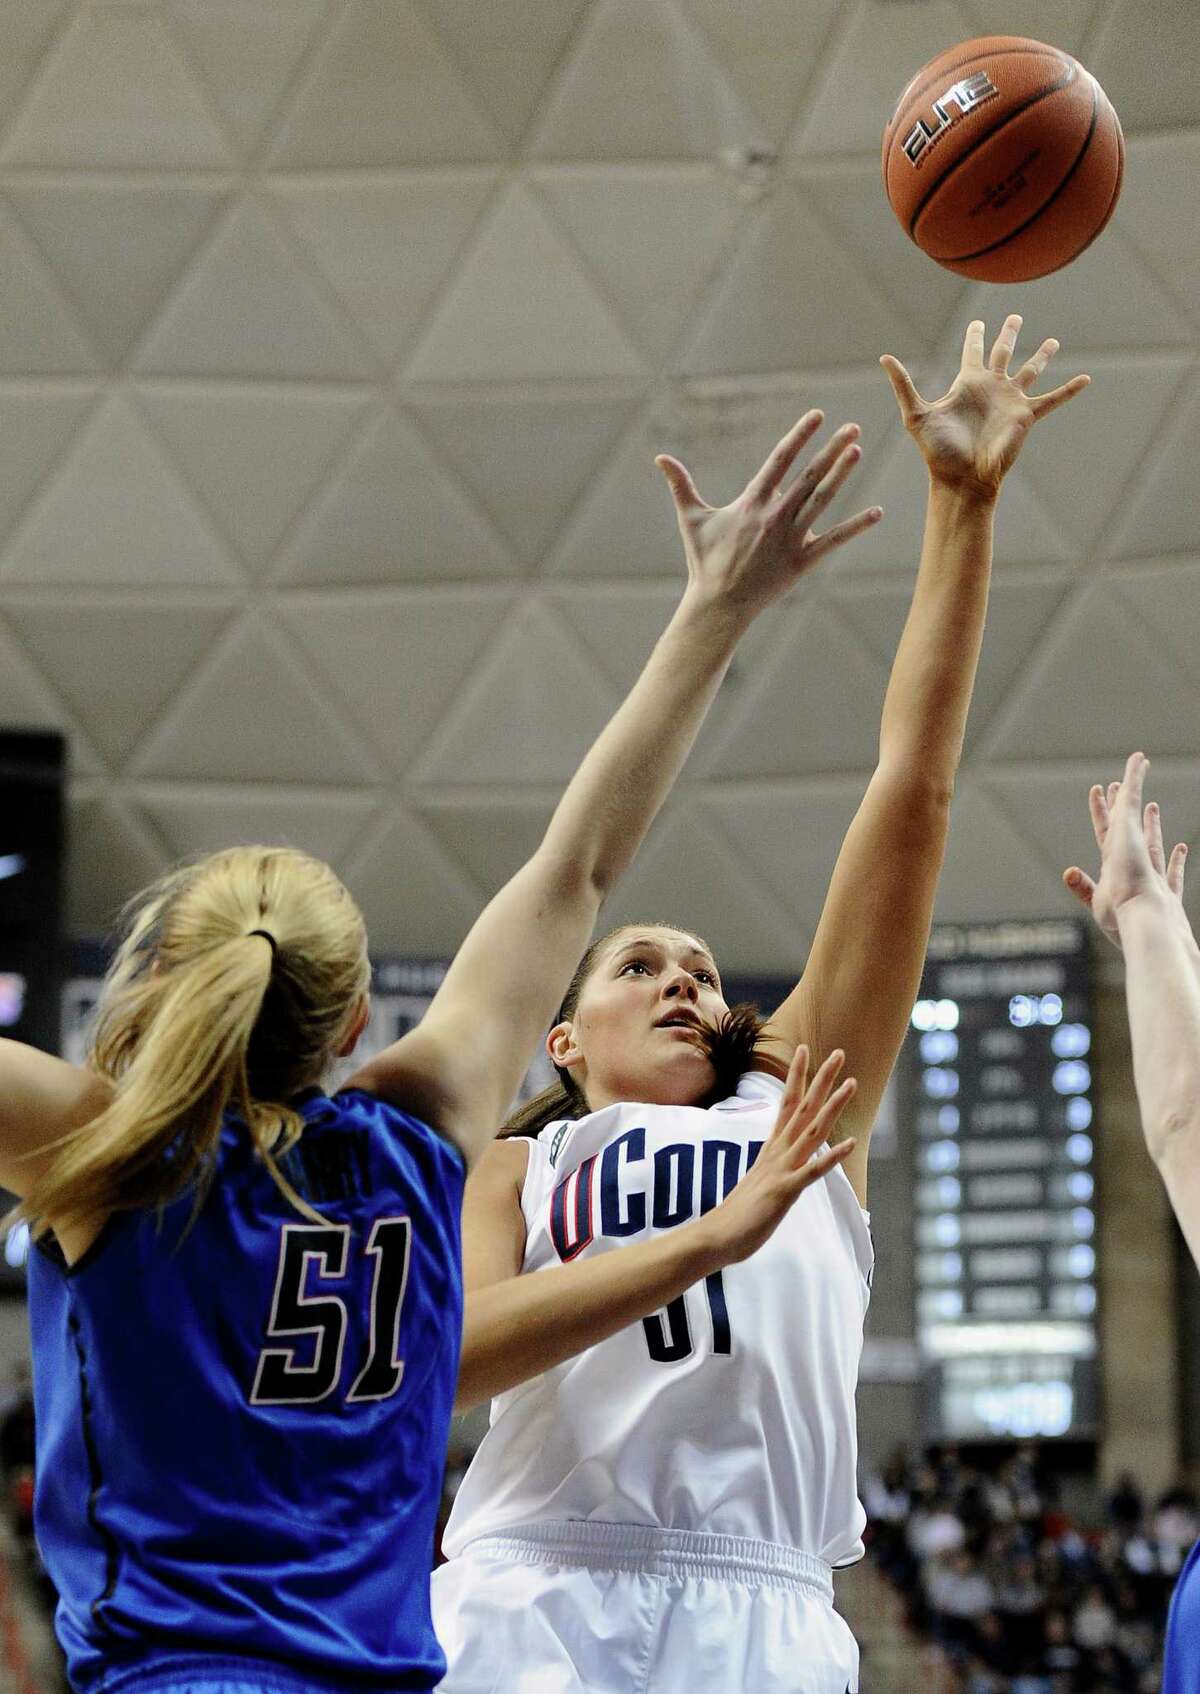 Connecticut's Stefanie Dolson, right, goes up for a basket as DePaul's Katherine Harry, left, defends during the first half of an NCAA college basketball game in Storrs, Conn., Sunday, Feb. 10, 2013. Dolson had 22 points in the first half. (AP Photo/Jessica Hill)